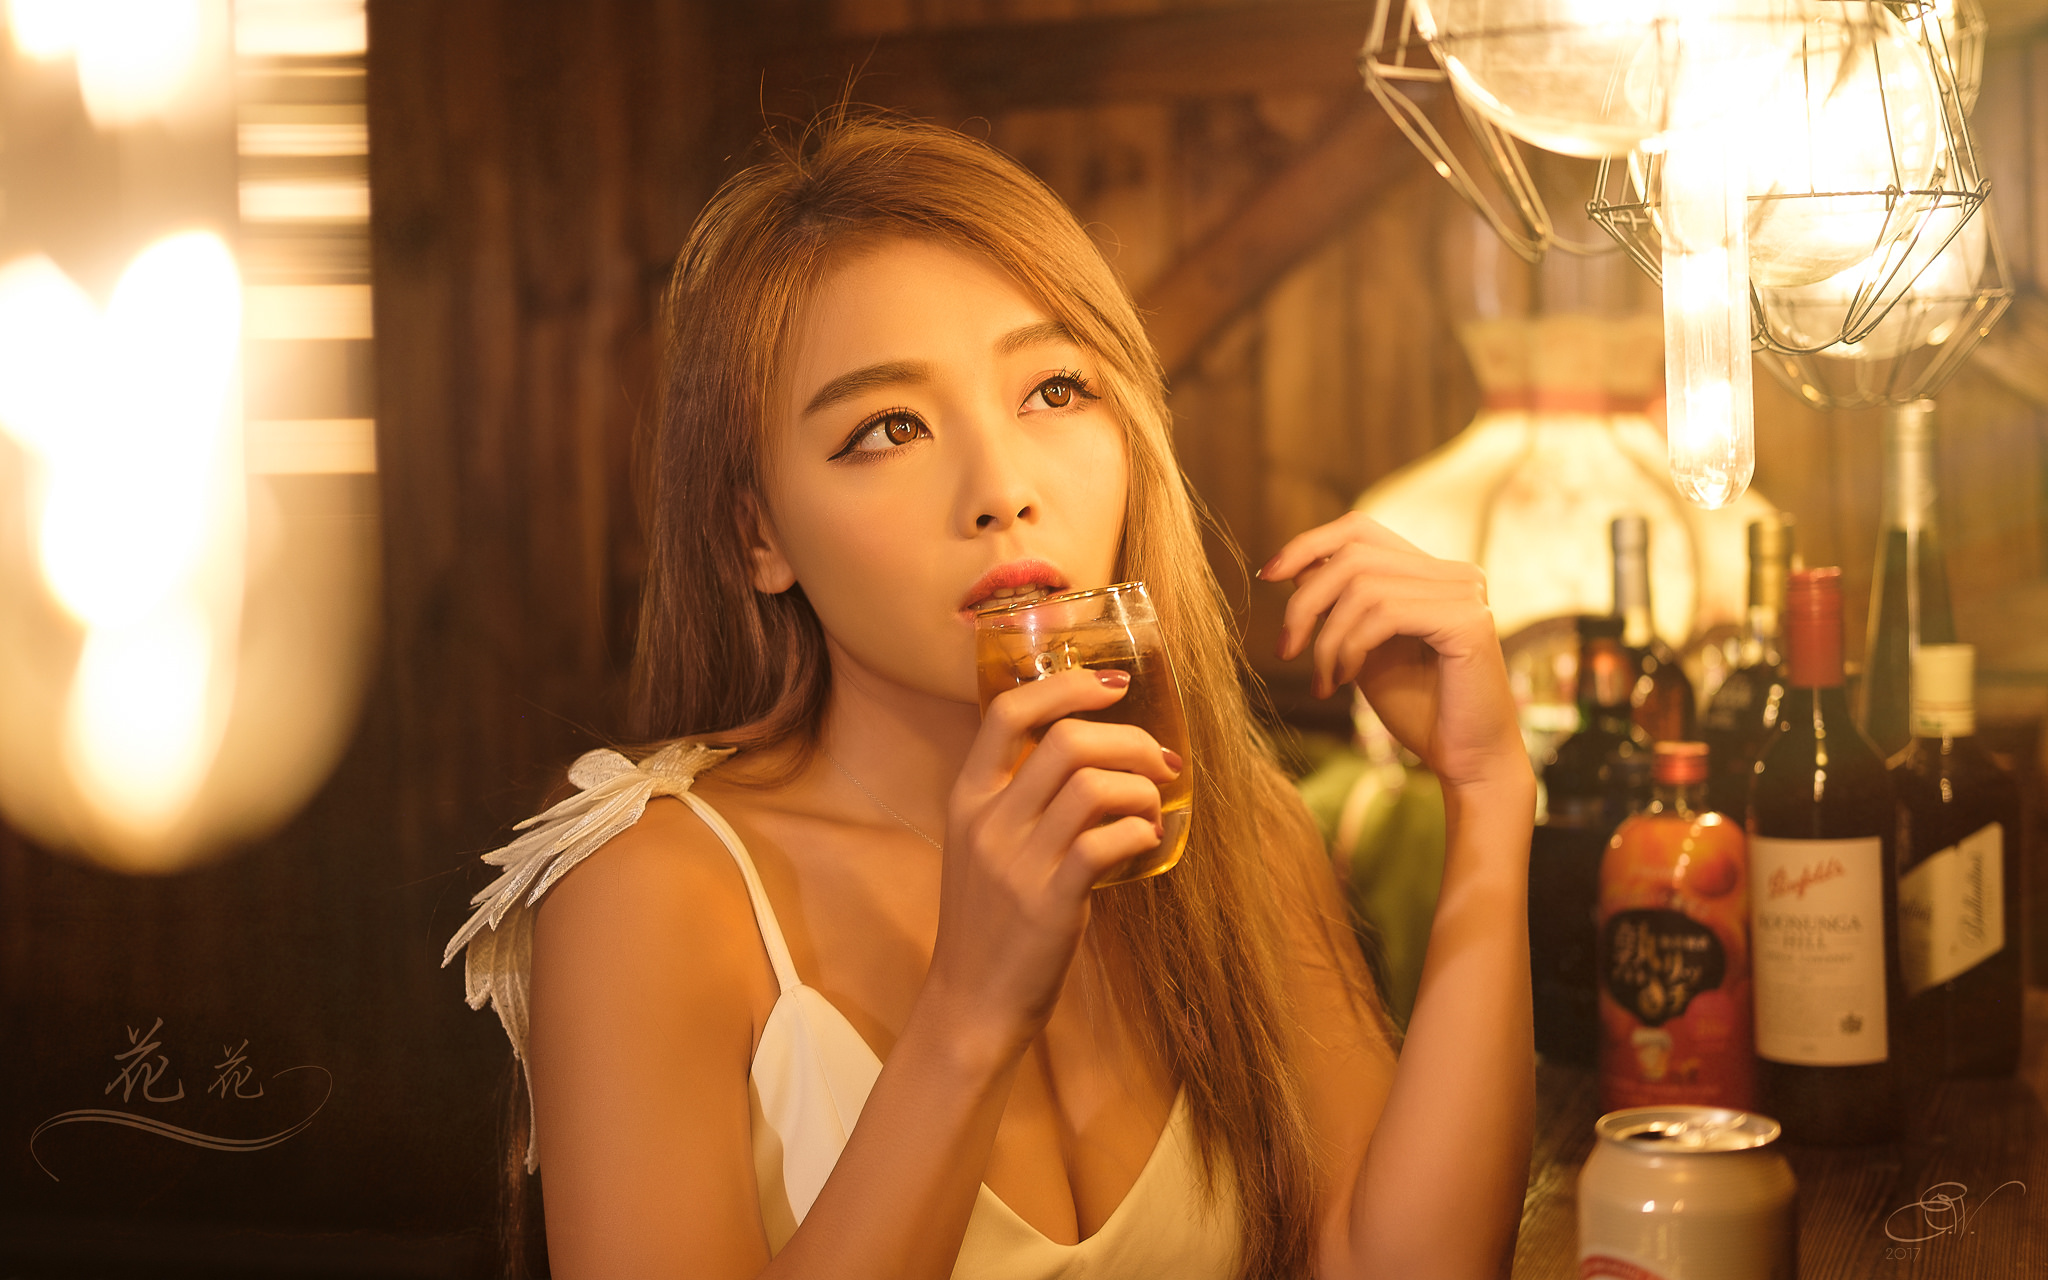 People 2048x1280 women model Asian looking up brunette long hair eyeliner portrait indoors dress white dress bar alcohol drinking glass can bottles lights light bulb bokeh painted nails women indoors cleavage